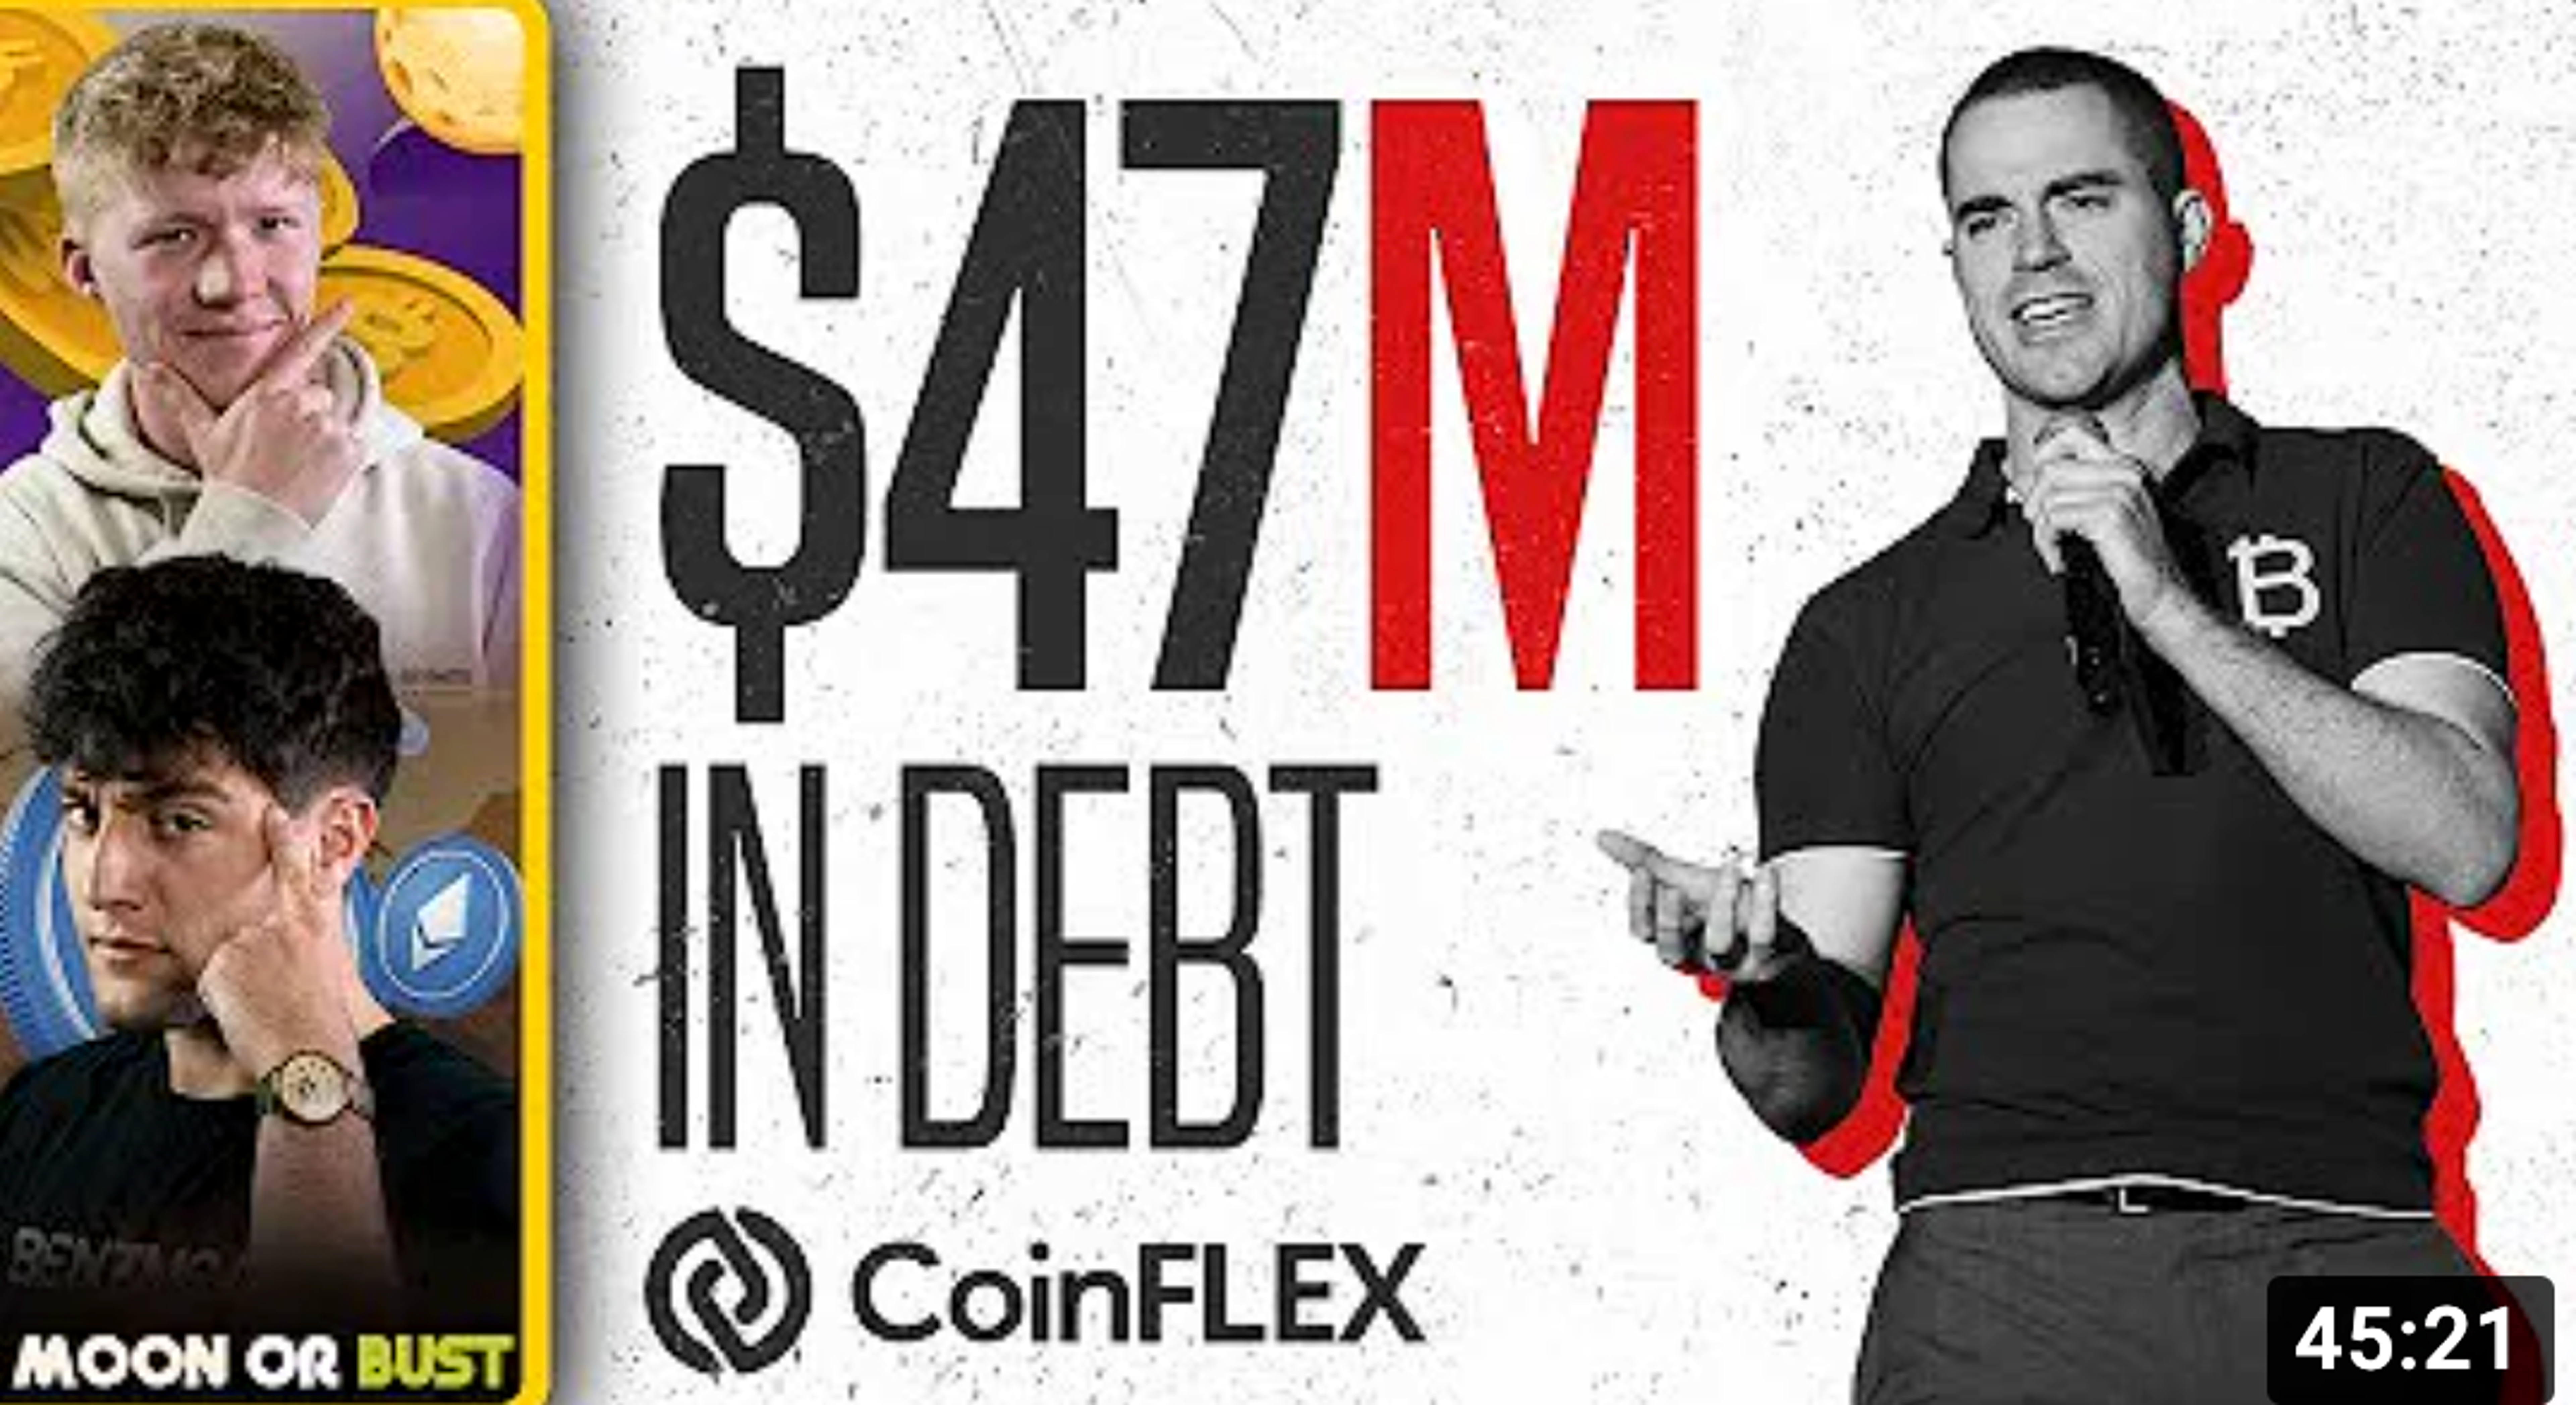 Exclusive: CoinFLEX CEO On &#39;Bitcoin Jesus&#39; Roger Ver, Debt And Exchange Withdrawal Freeze